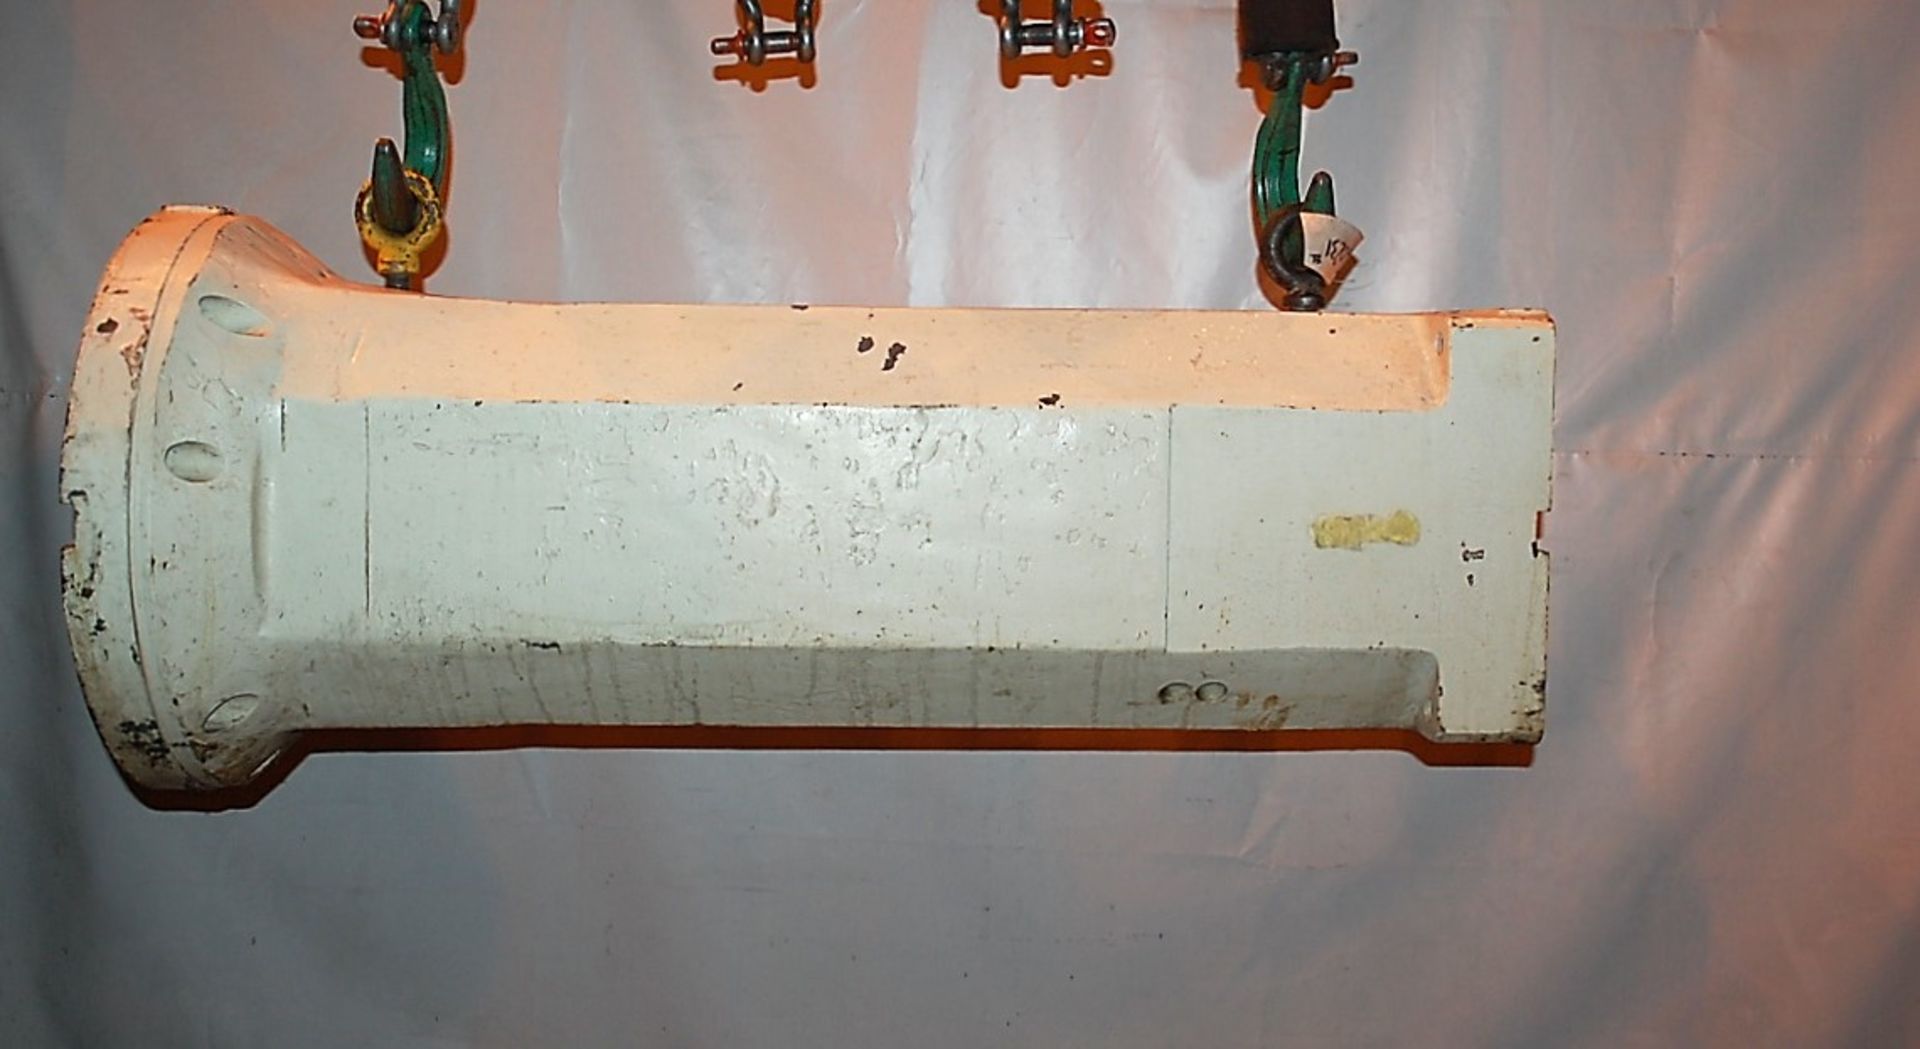 INGERSOLL 52" Right Angle Head Extension - Image 3 of 6